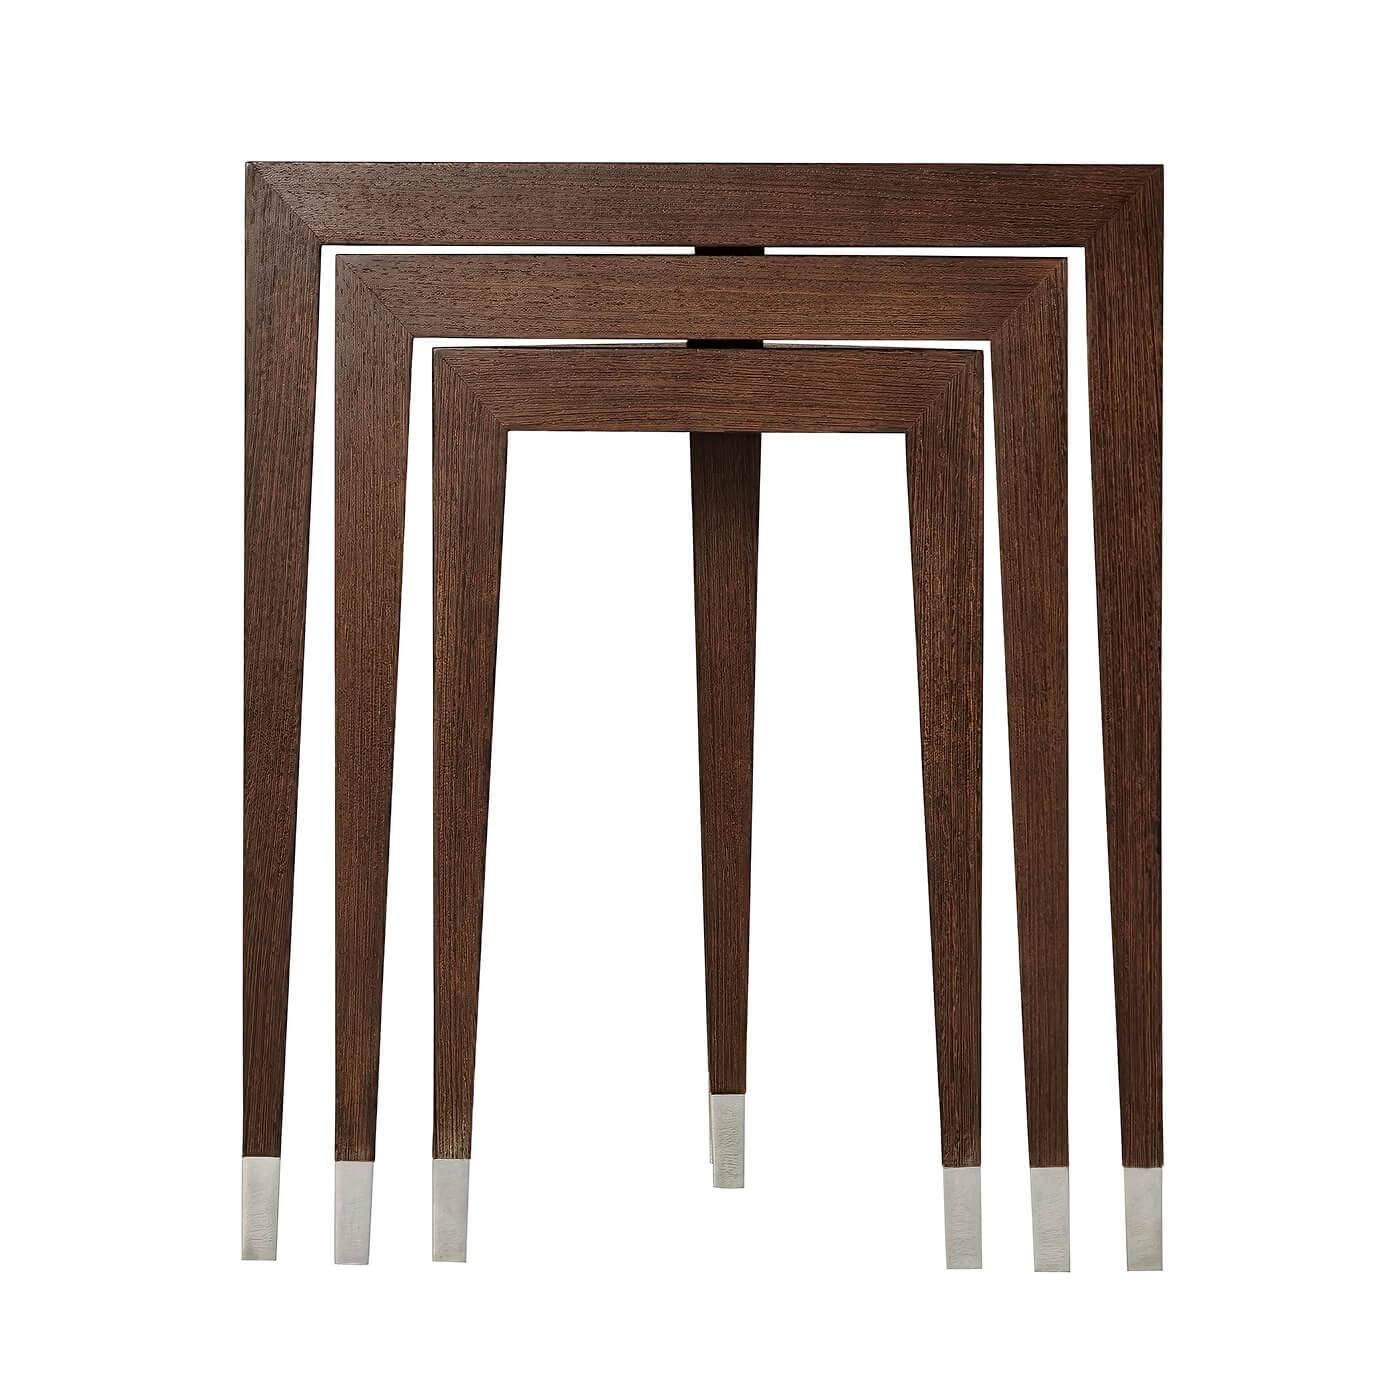 A nest of three Wenge veneer tables, each graduated table with a triangular top and tapering triangular legs with stainless steel feet. Inspired by Art Deco originals.

Dimensions: 20